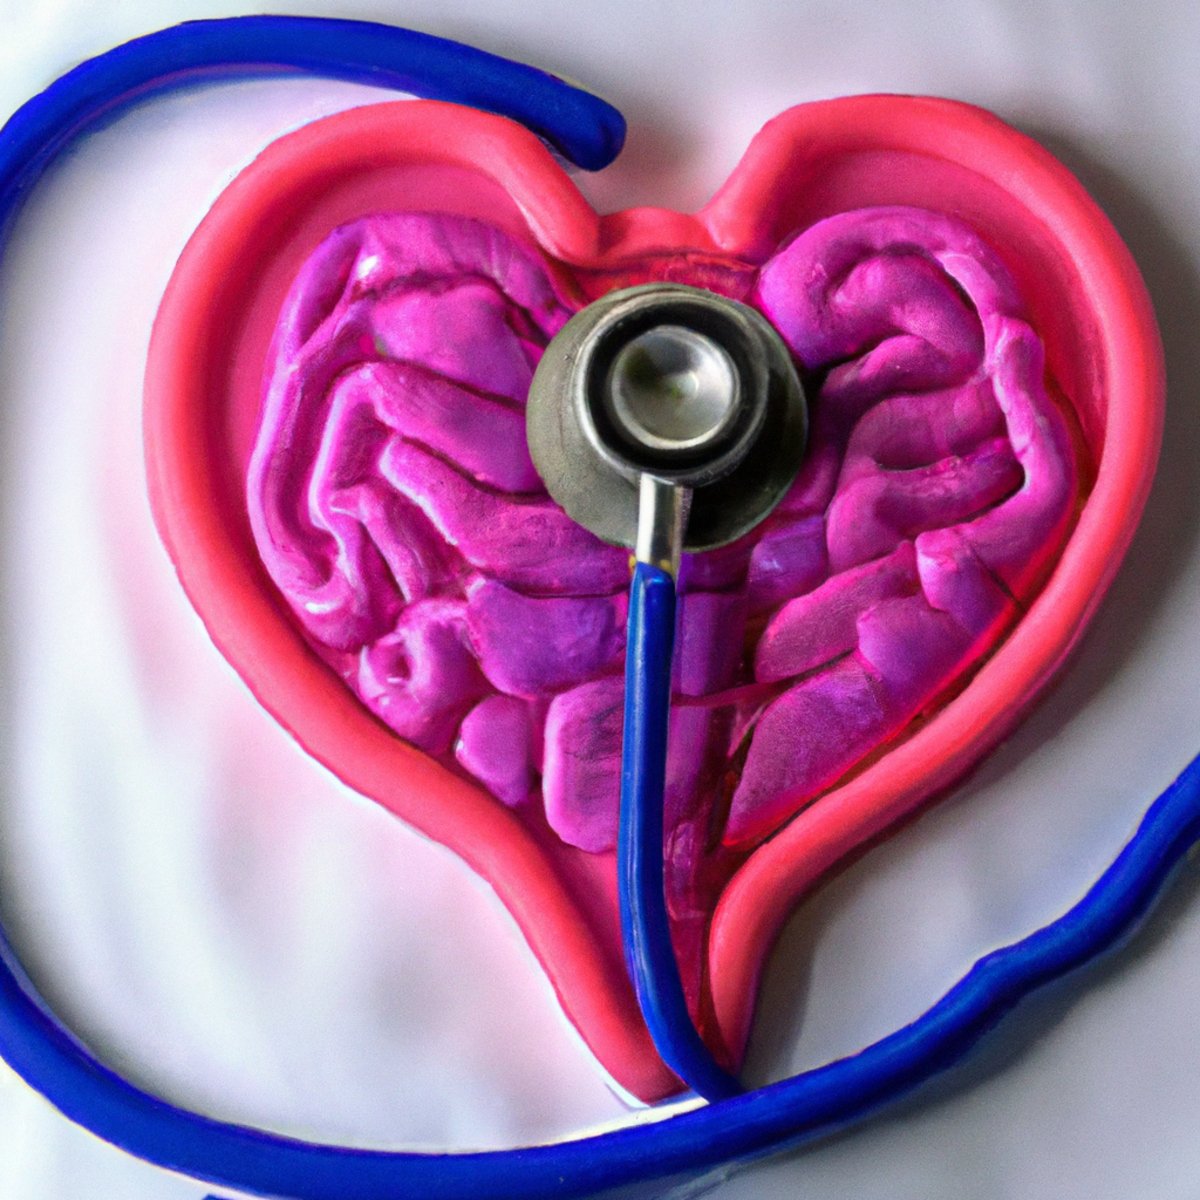 Stethoscope on heart-shaped model symbolizes diagnosing giant cell myocarditis, highlighting importance of accurate diagnosis and medical community's efforts - Giant Cell Myocarditis